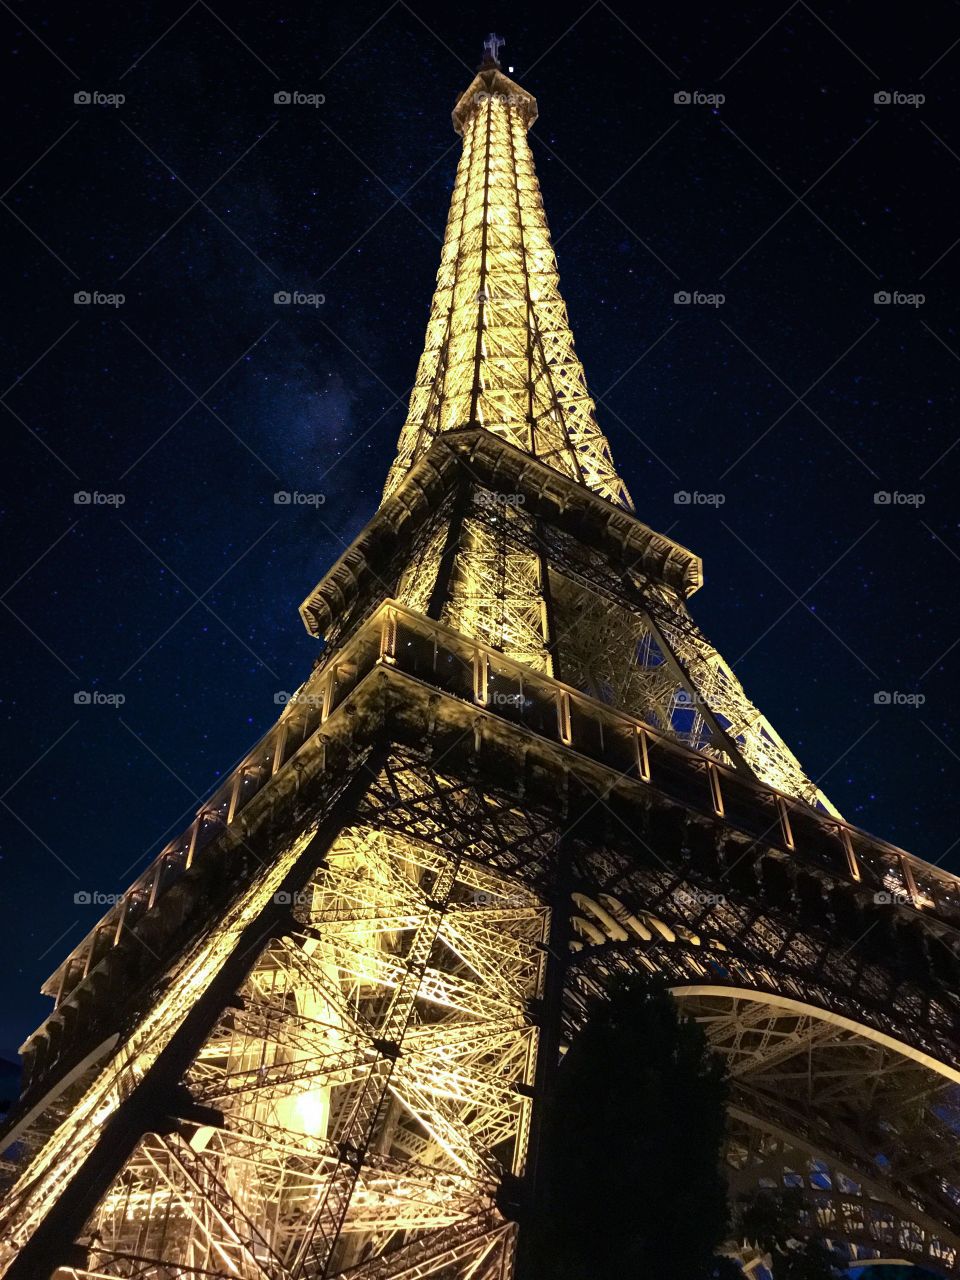 Eiffel tower & the galaxy, raise the screen brightness to see the stars